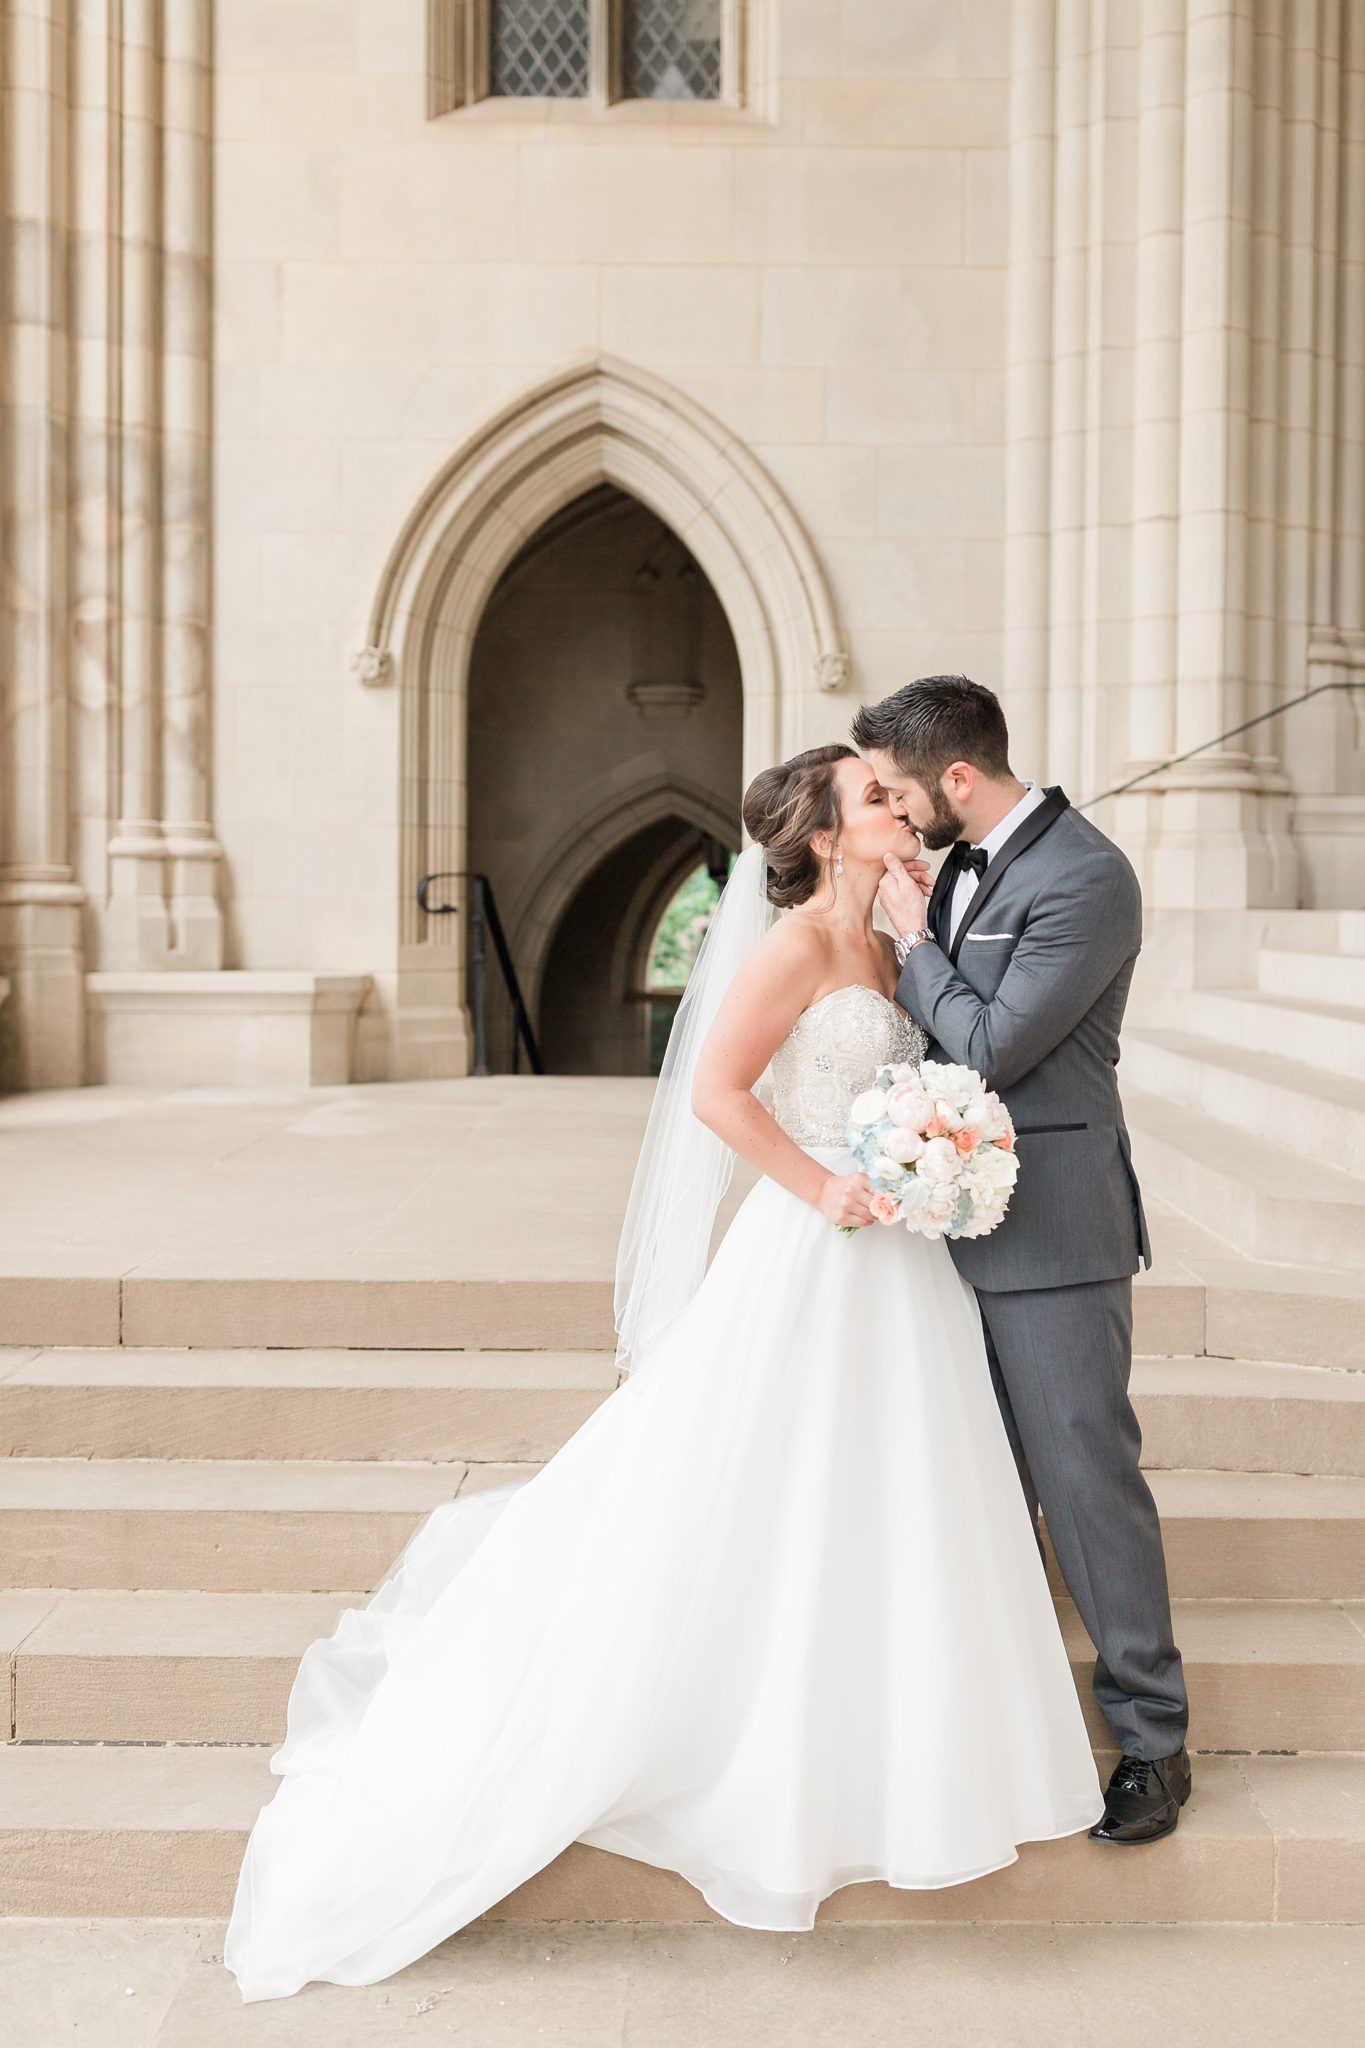 A gorgeous spring wedding is held at Washington, DC's Fairmont Hotel with portraits at Washington National Cathedral.